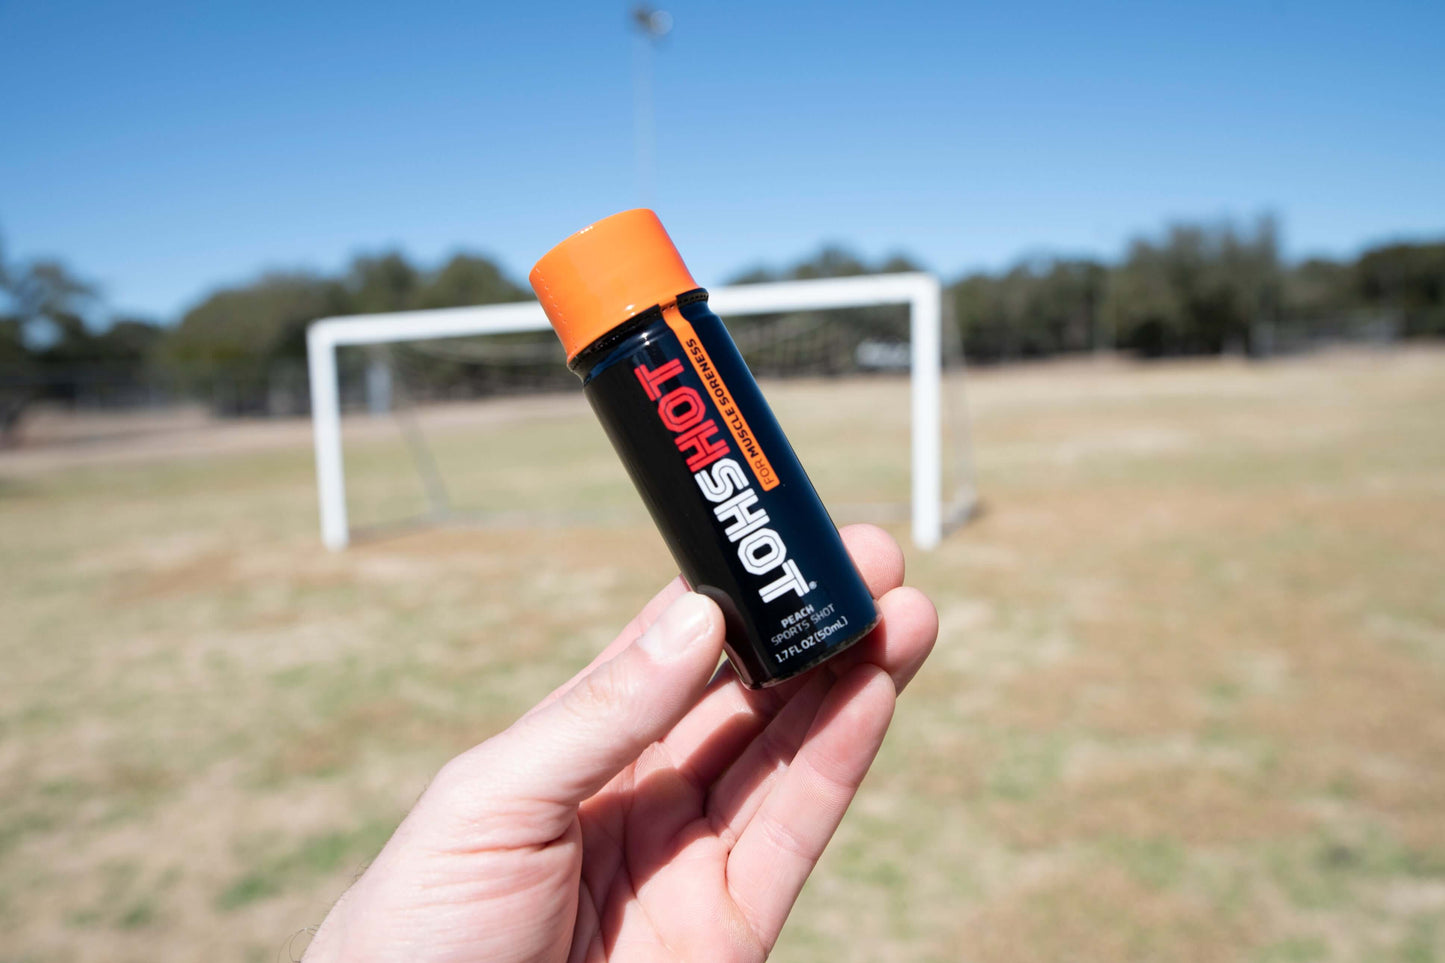 HOTSHOT for Athletic Muscle Soreness Shot on Soccer Field